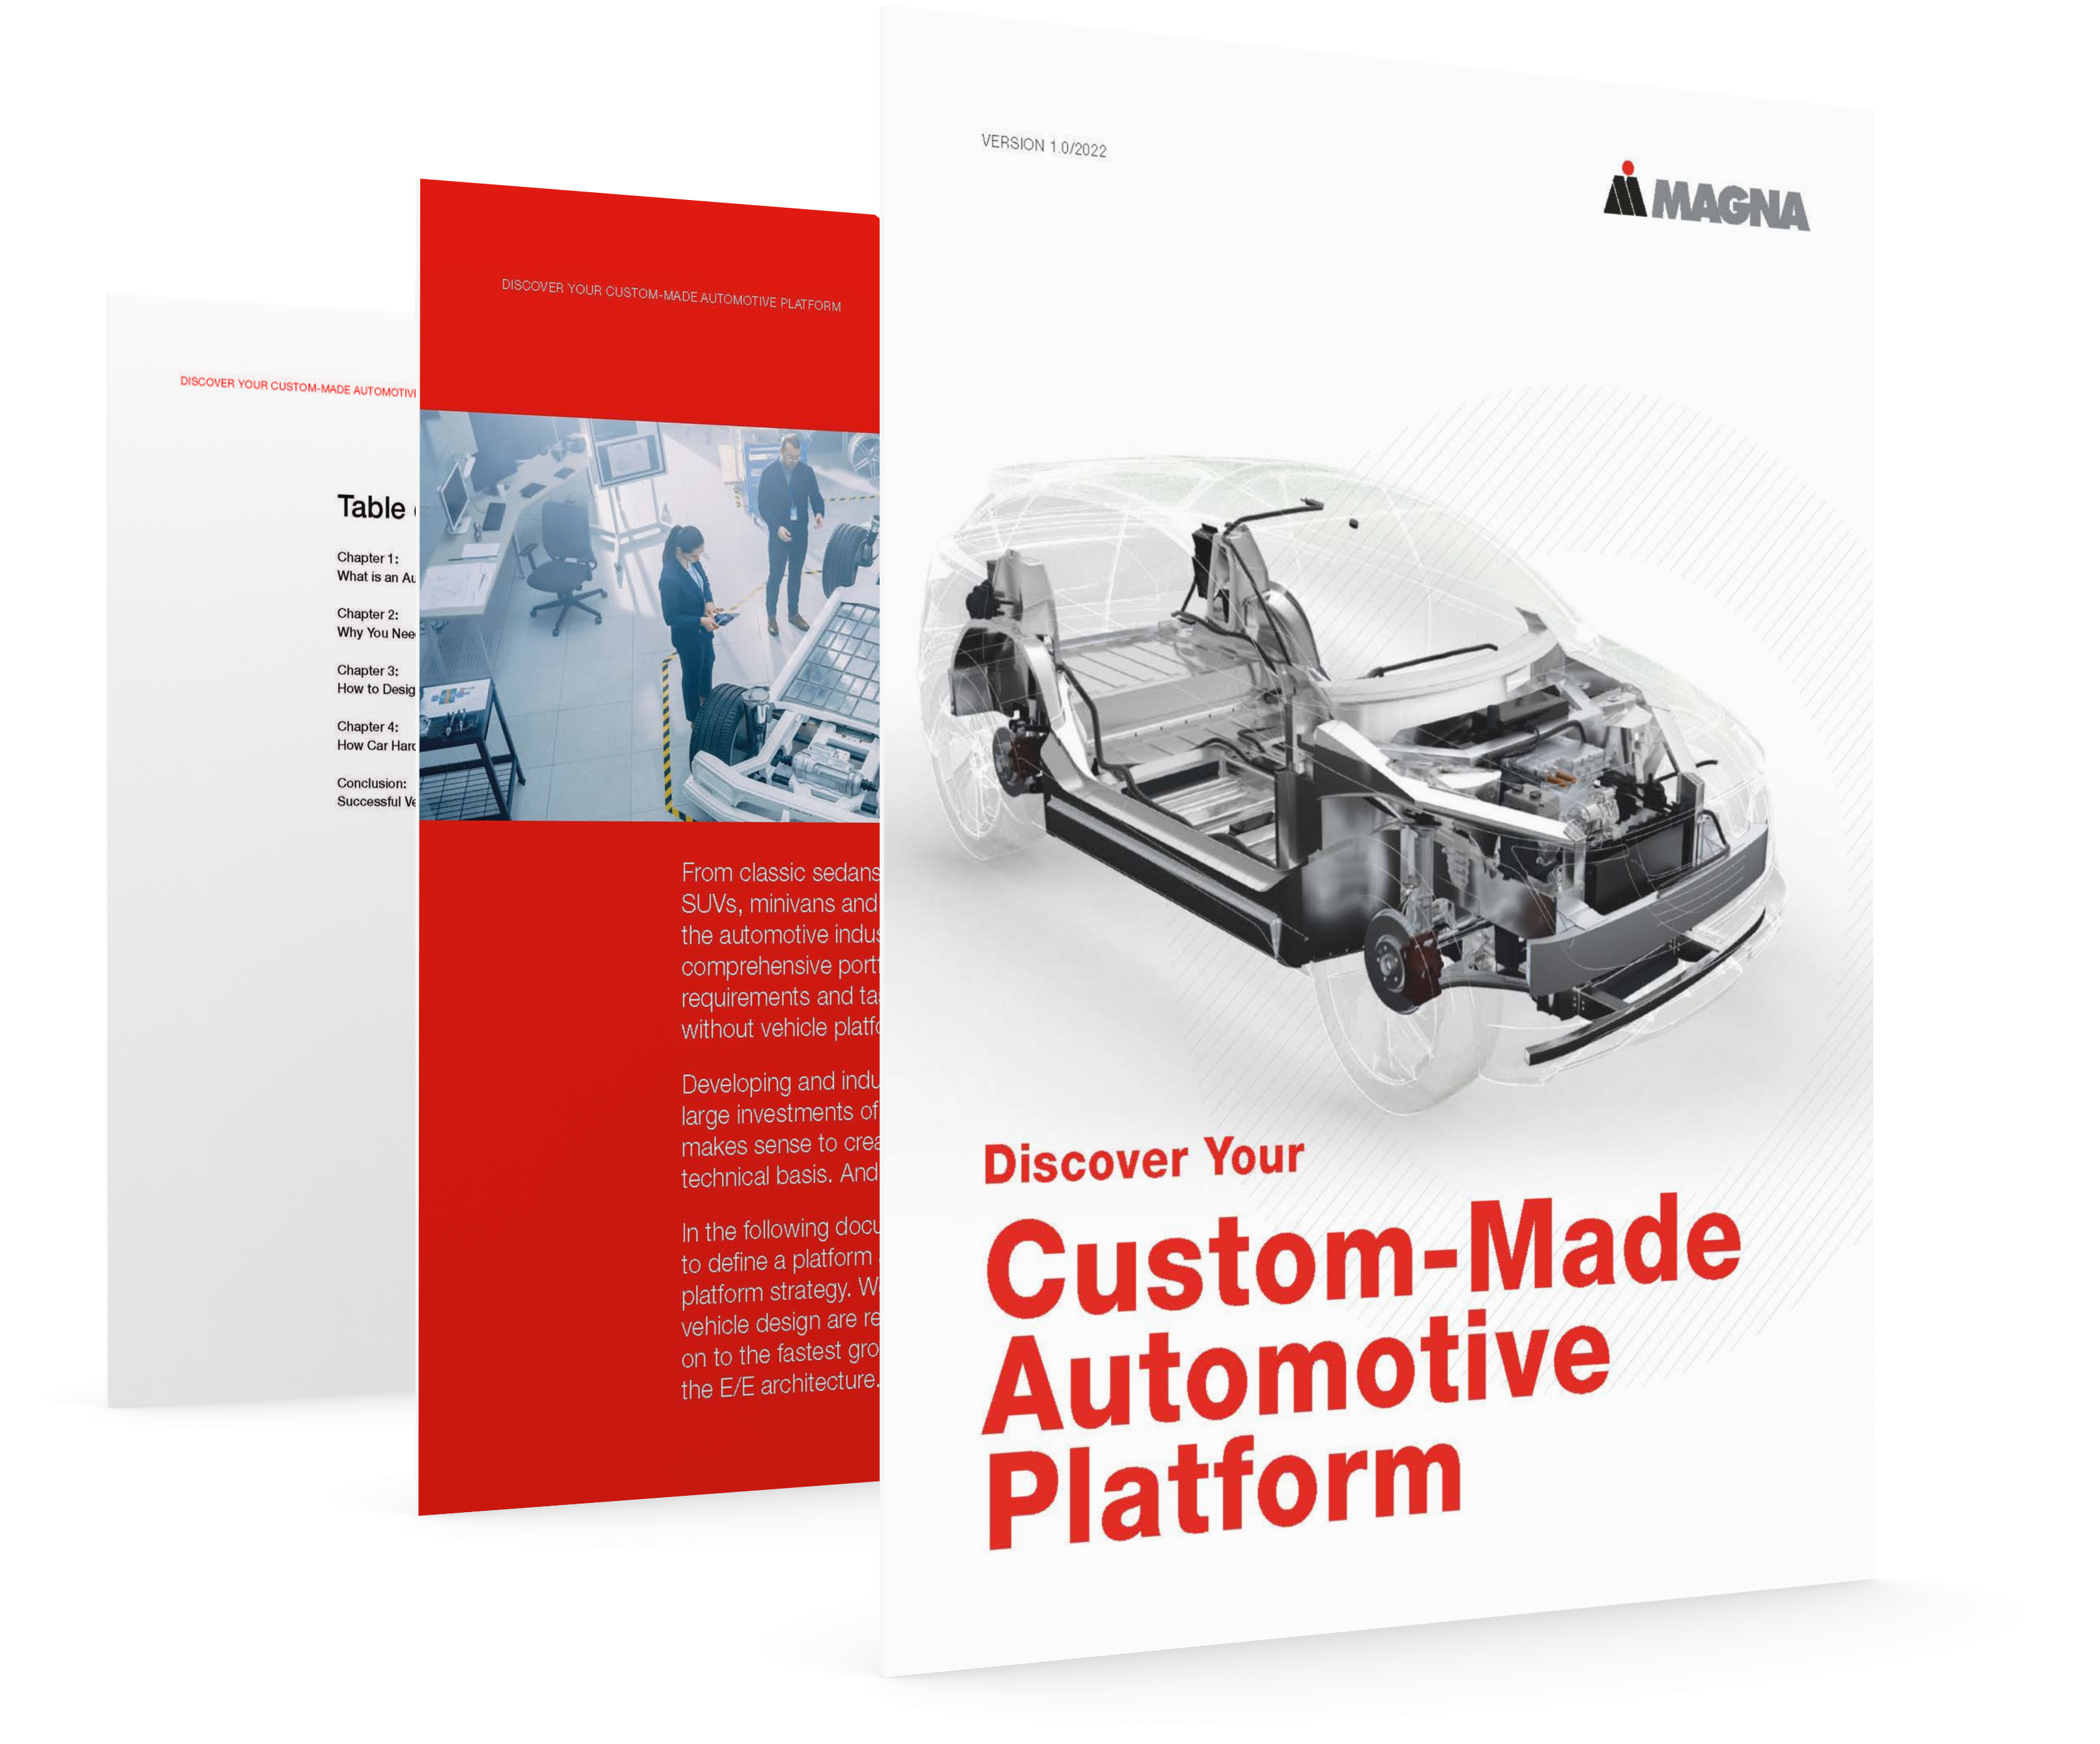 Free Whitepaper about Car Platforms from Magna Steyr